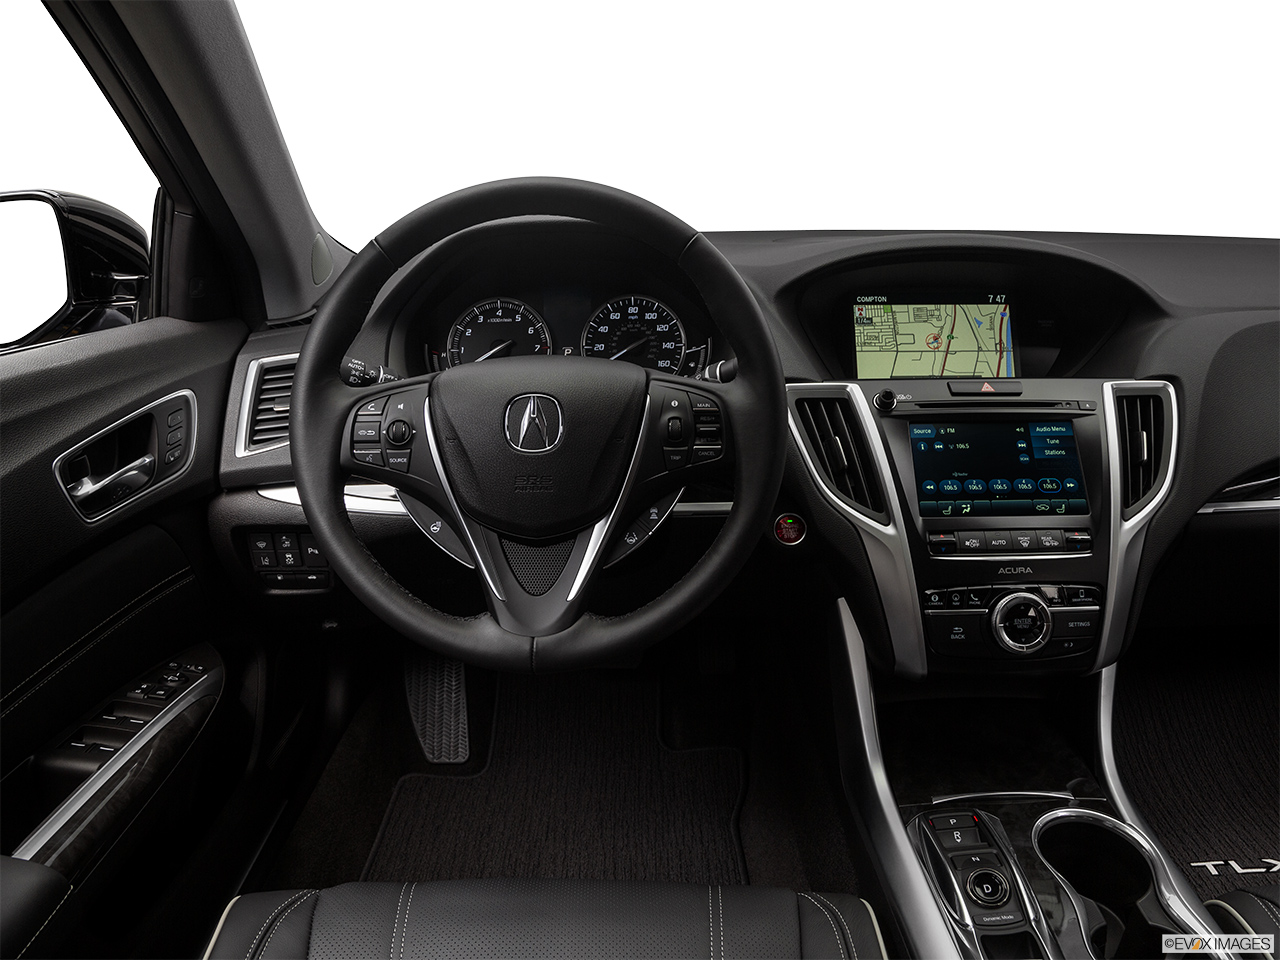 2018 Acura TLX 3.5L Steering wheel/Center Console. 